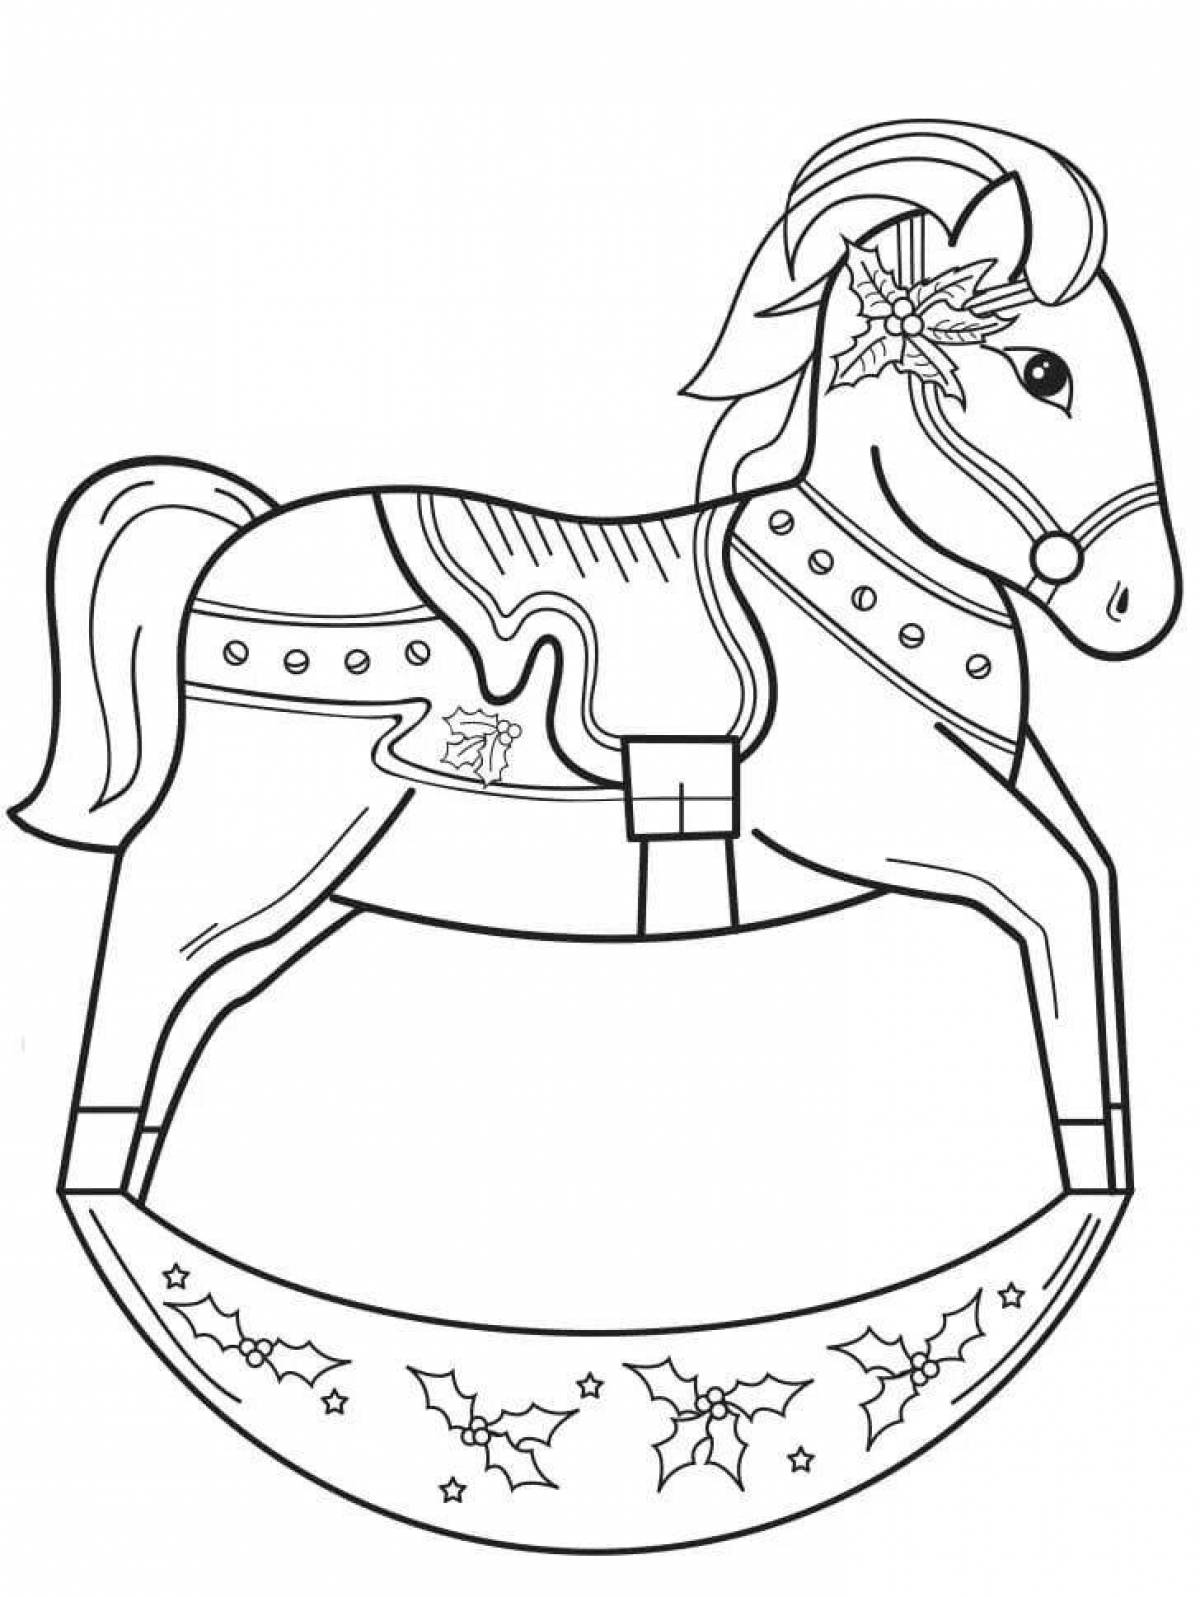 Coloring page magical Gorodets horse